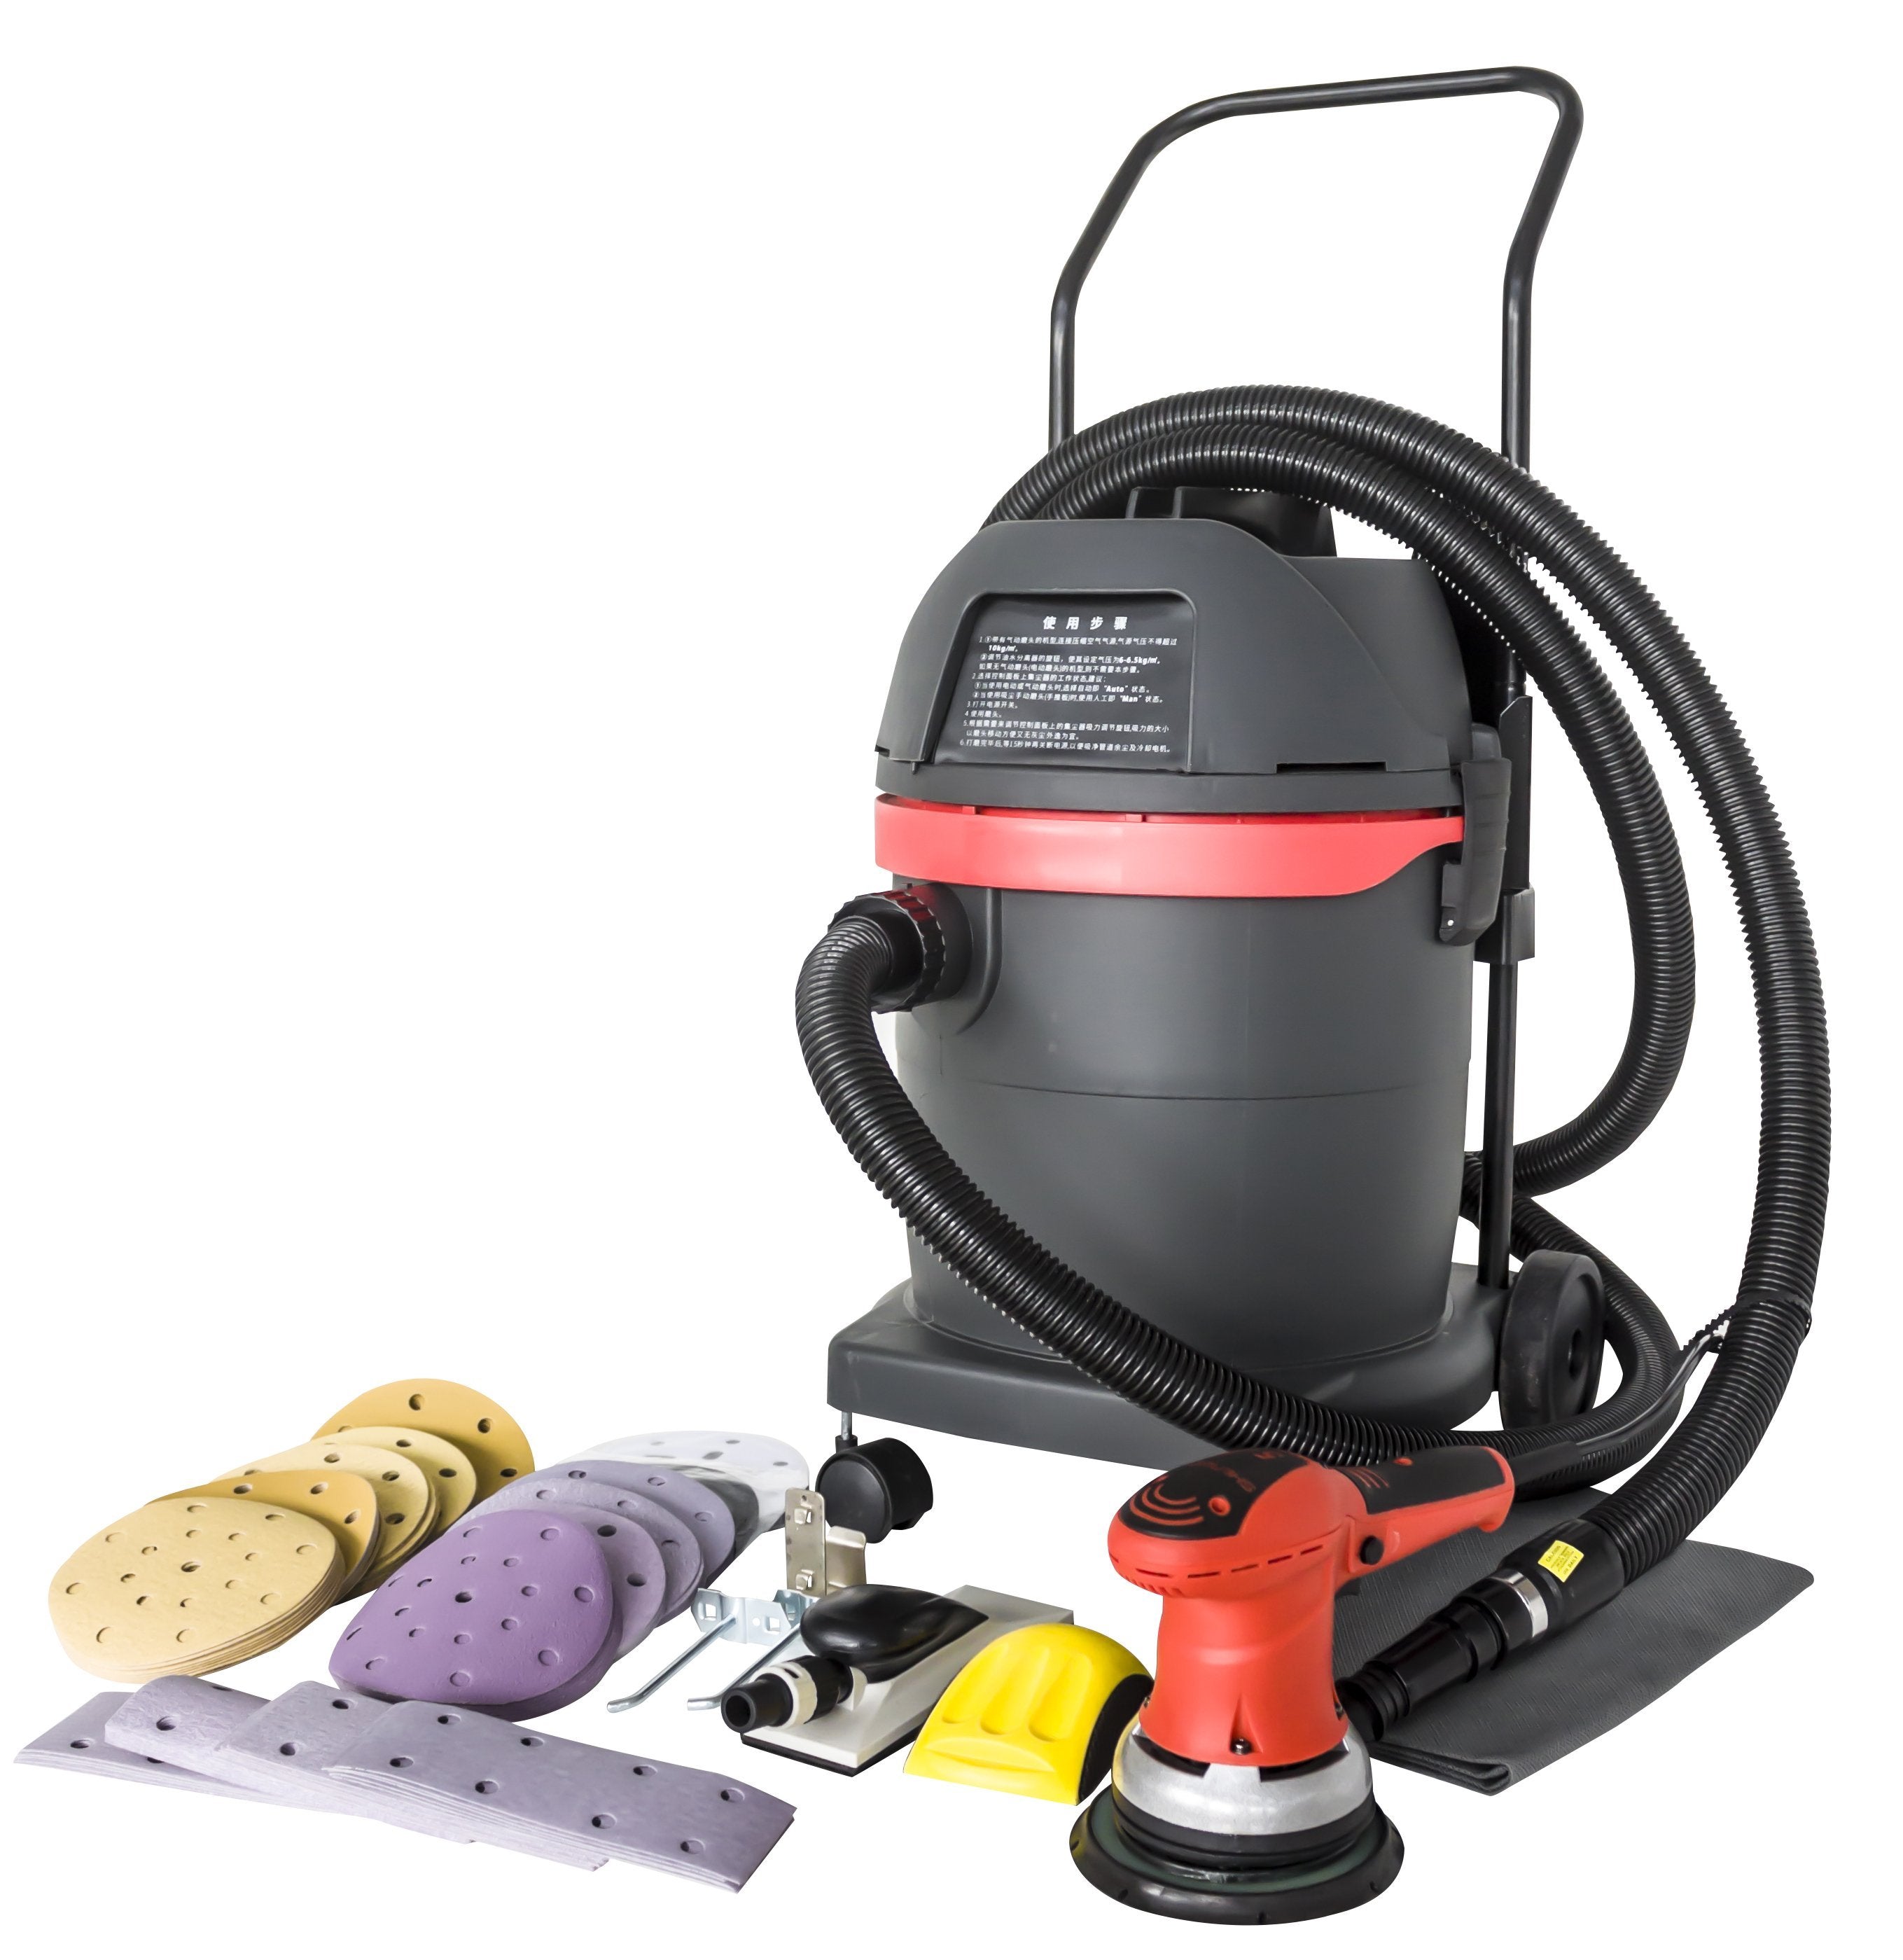 Solary Electricals DG8 Dust-Free Sanding System - Auto Body Collision Repair Welding Products